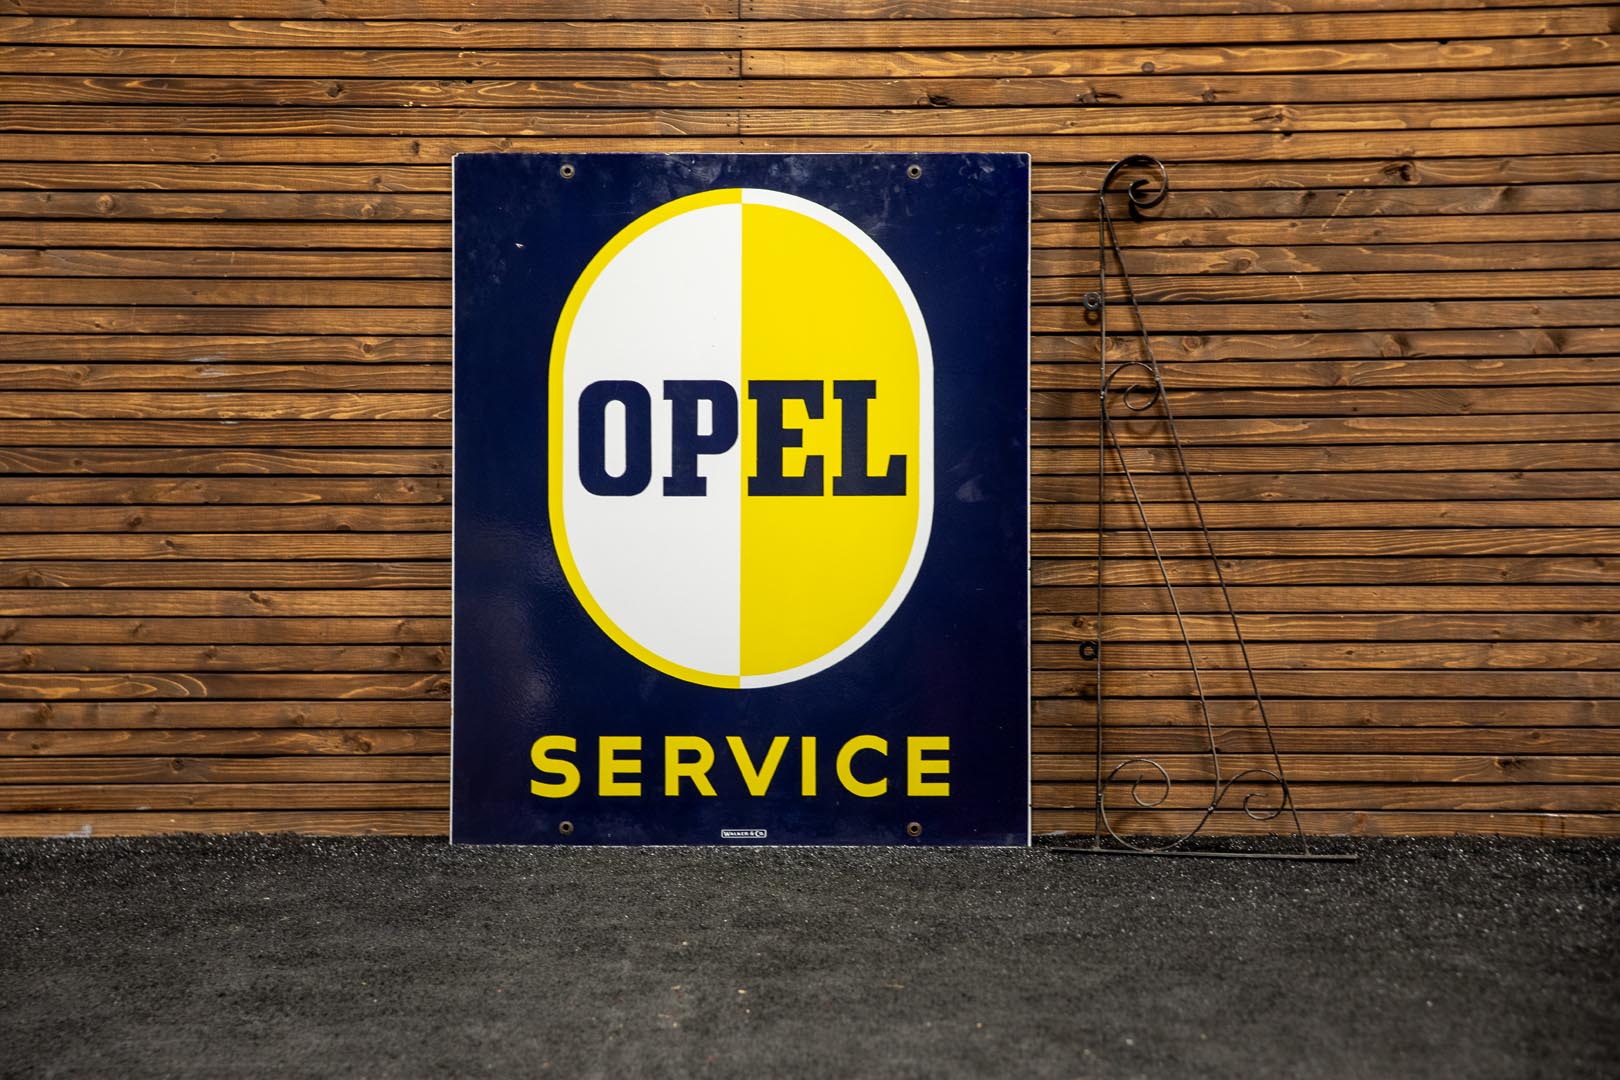  Opel Service Double-Sided Porc elain Sign with Hanger by Walker 